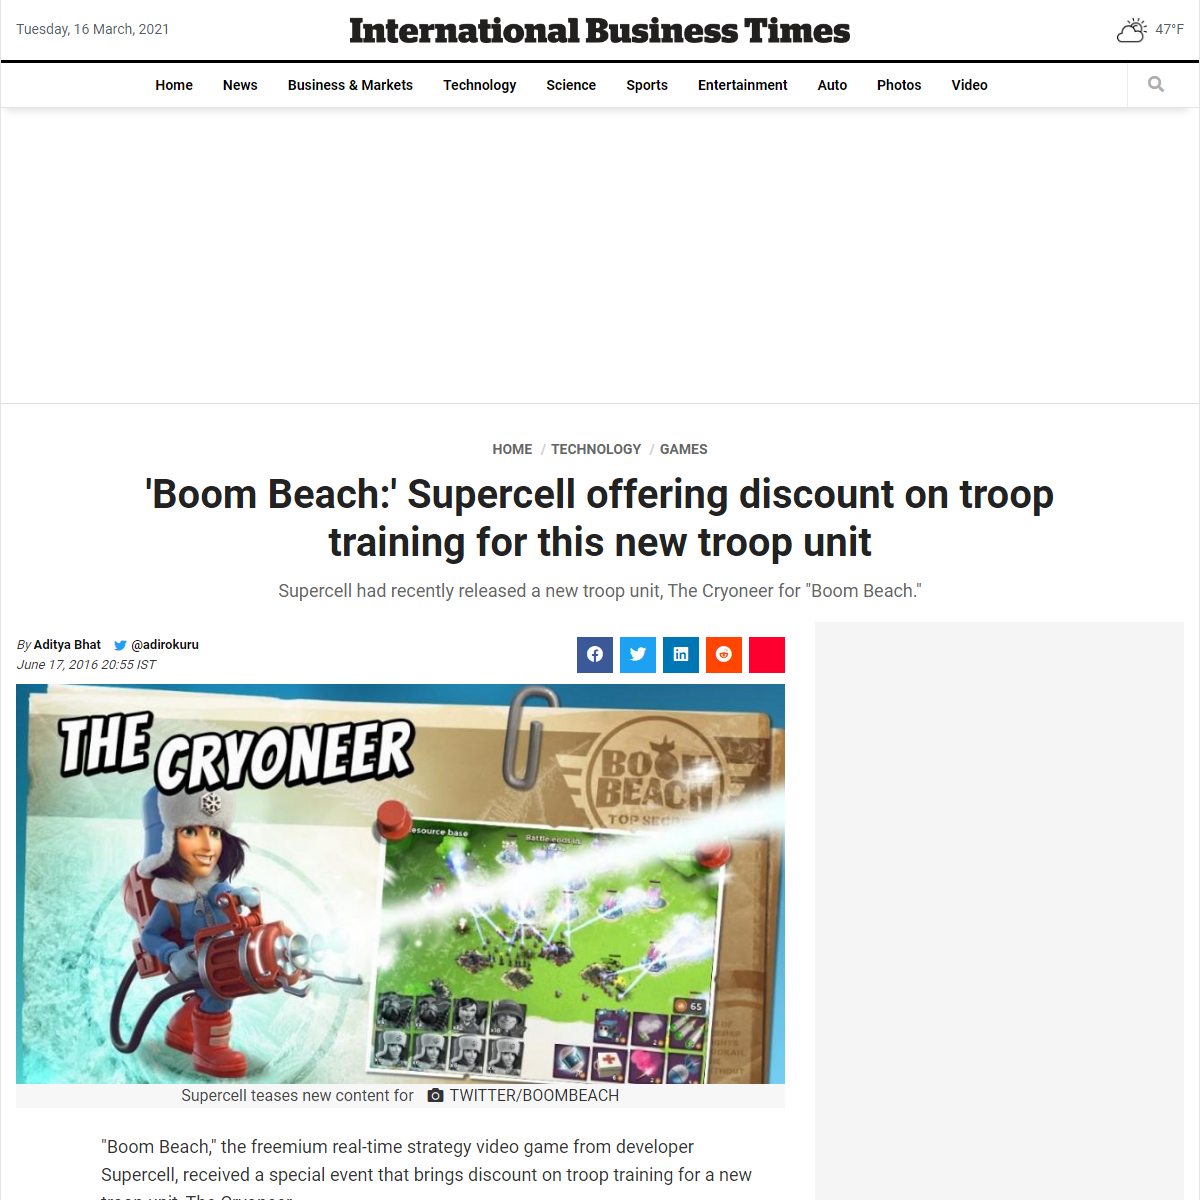 A complete backup of https://www.ibtimes.co.in/boom-beach-supercell-offering-discount-troop-training-this-new-troop-unit-683244